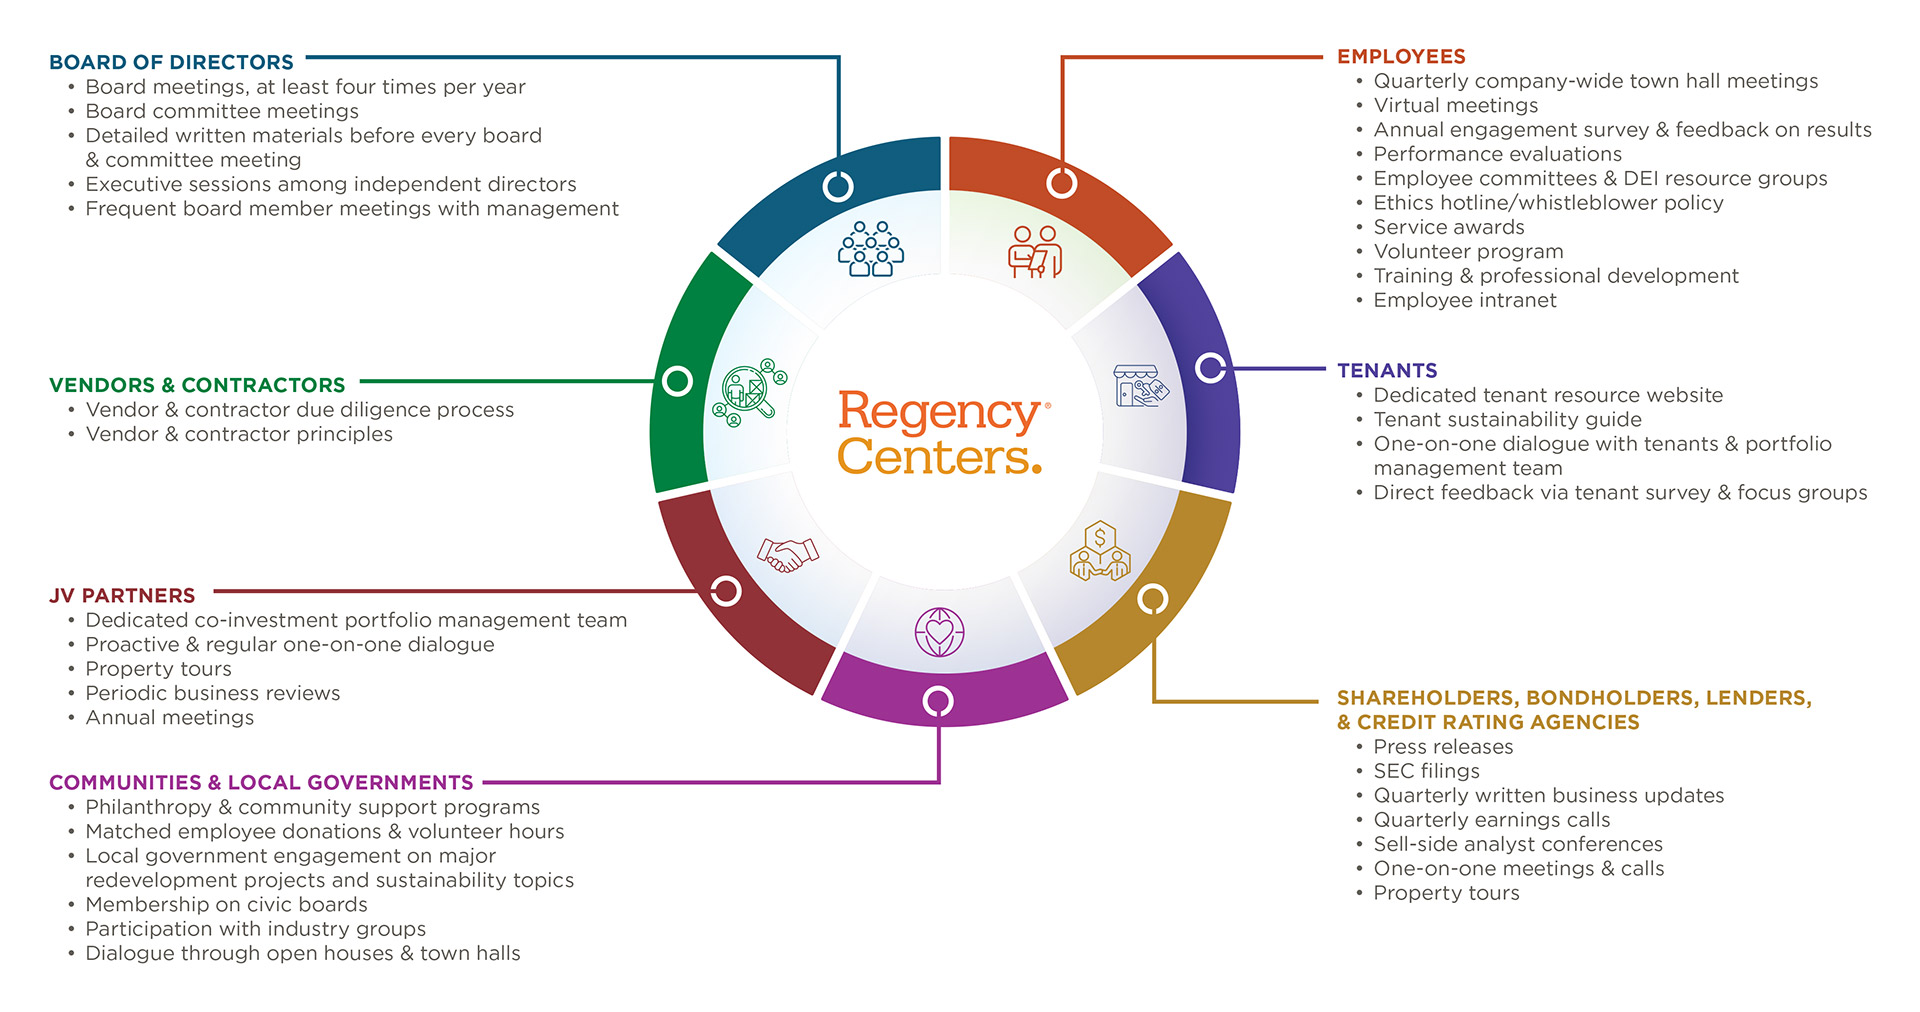 Graphic showing wheel of Regency Centers' stakeholder engagement, including: Board of Directors, Vendors and Contractors, JV Partners, Communities and Local Governments, Employees, Tenants, and Shareholders.